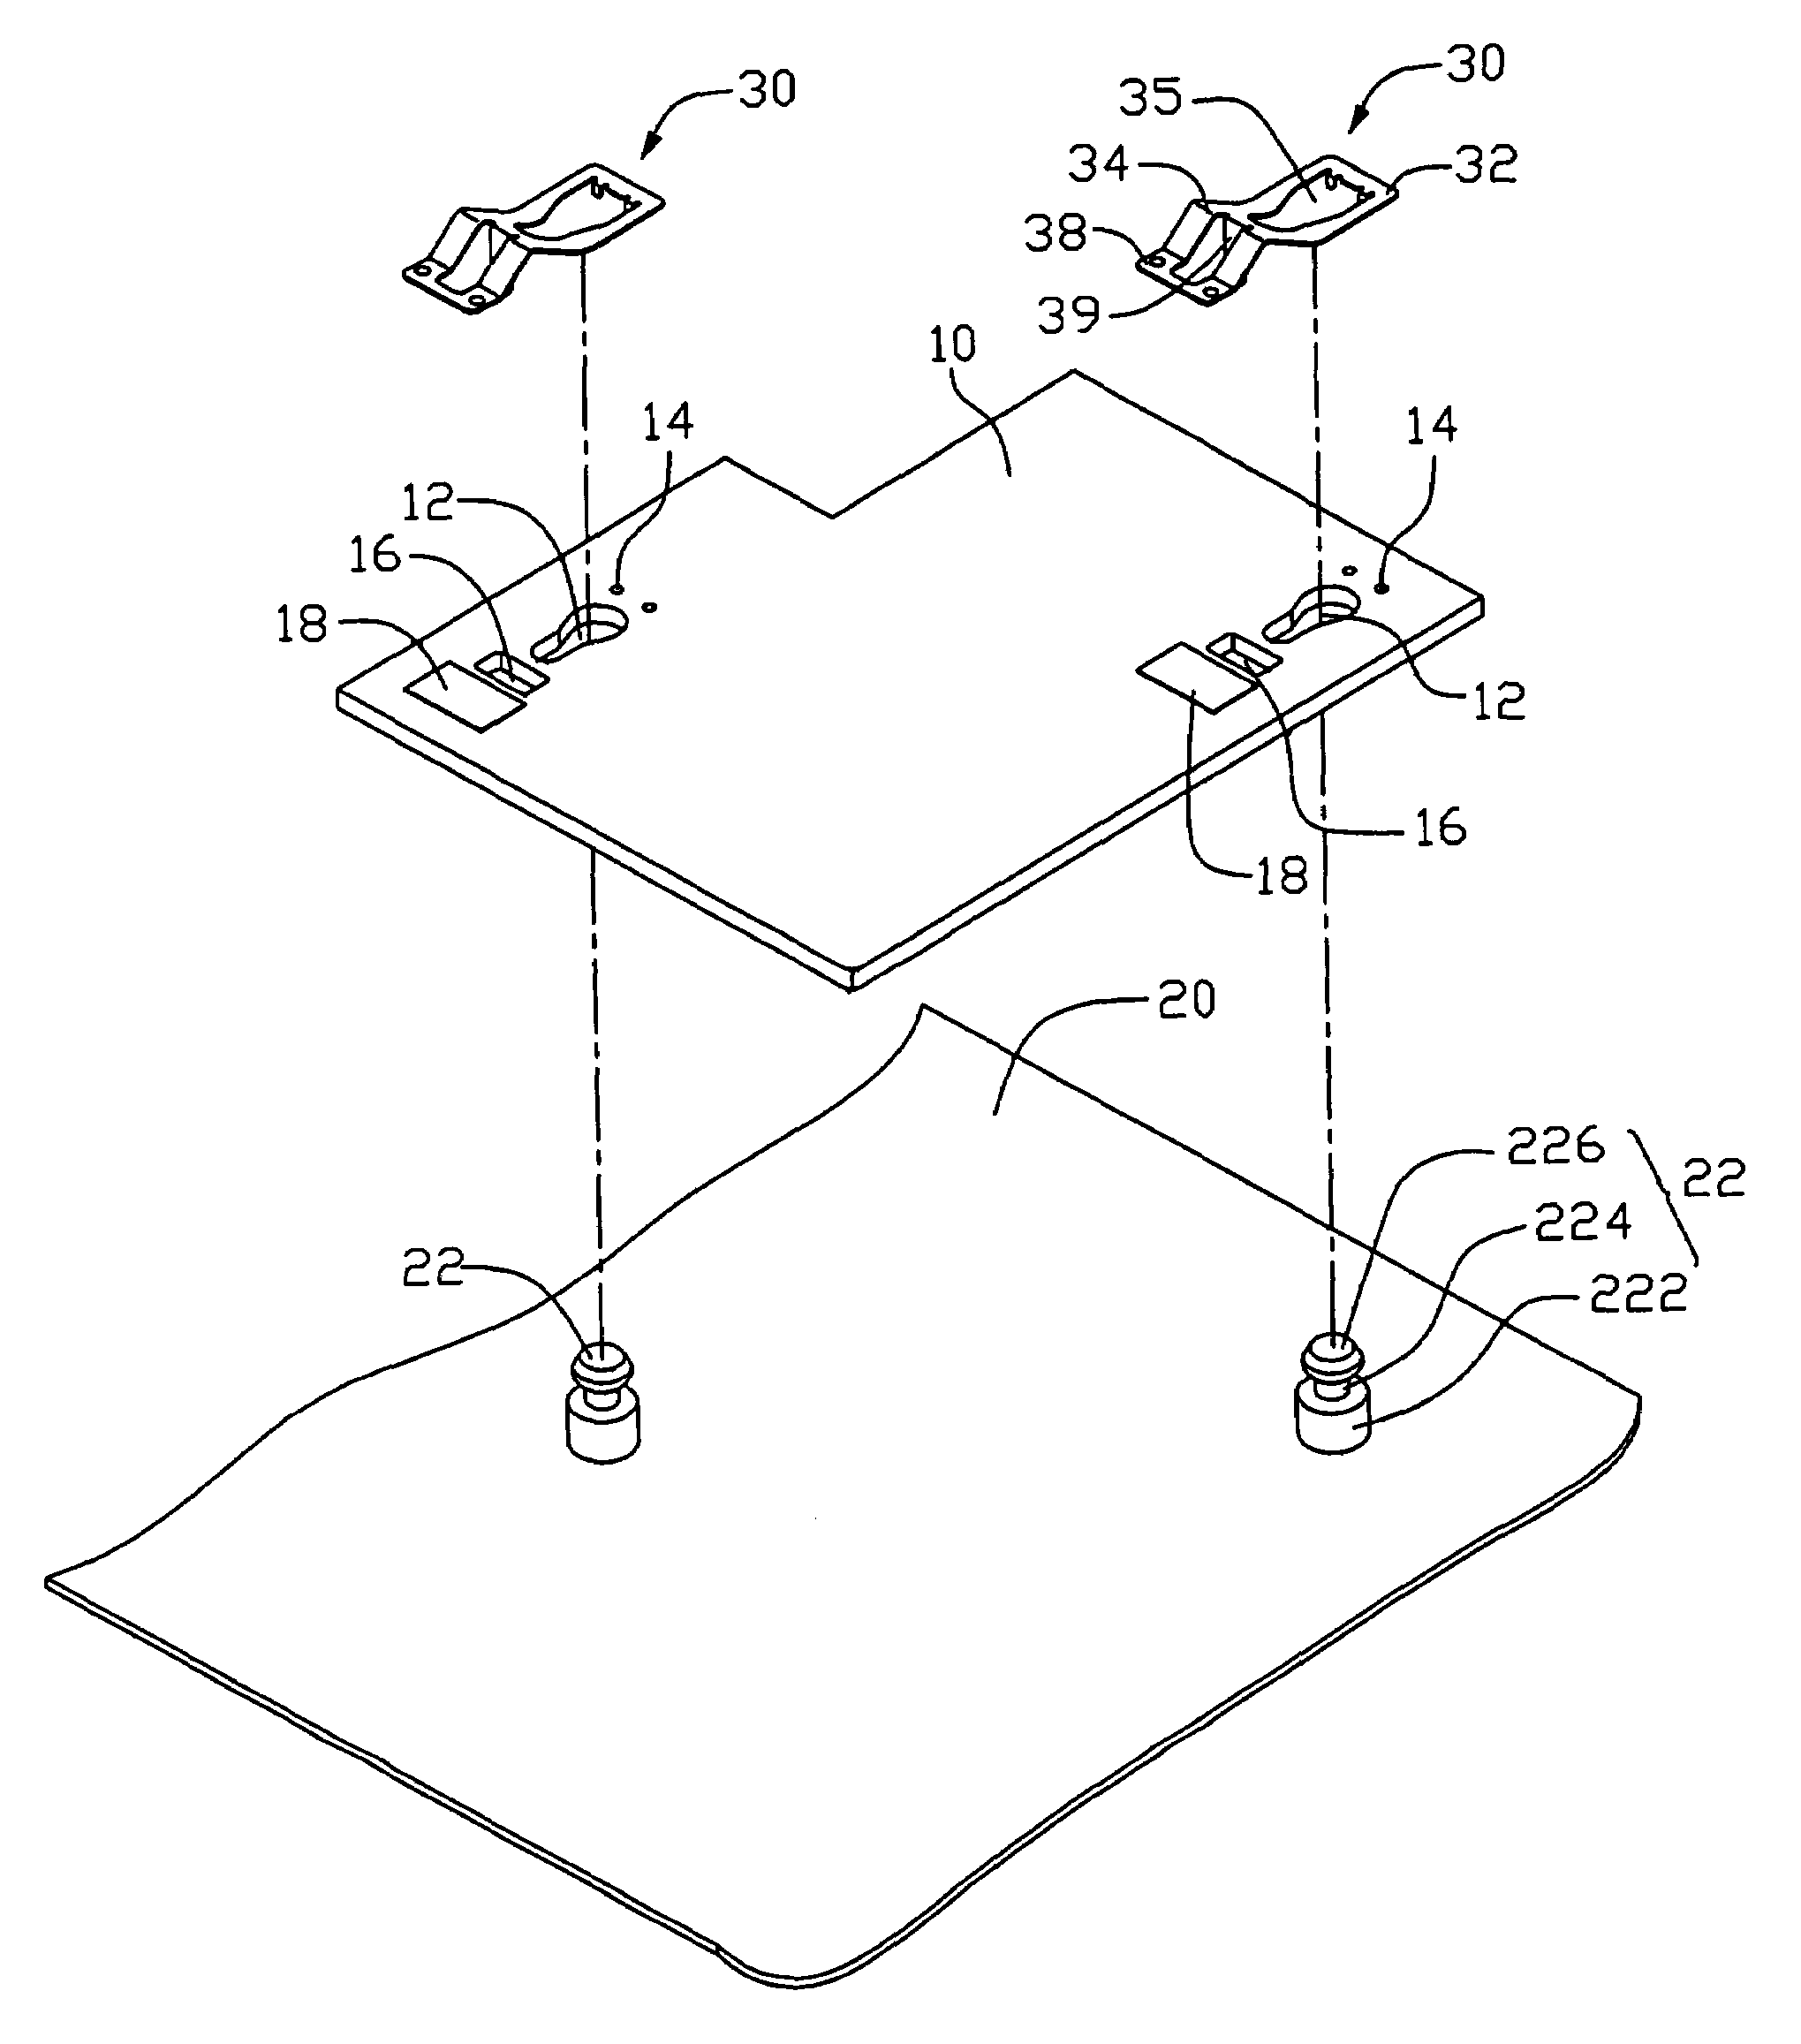 Mounting apparatus for printed circuit board